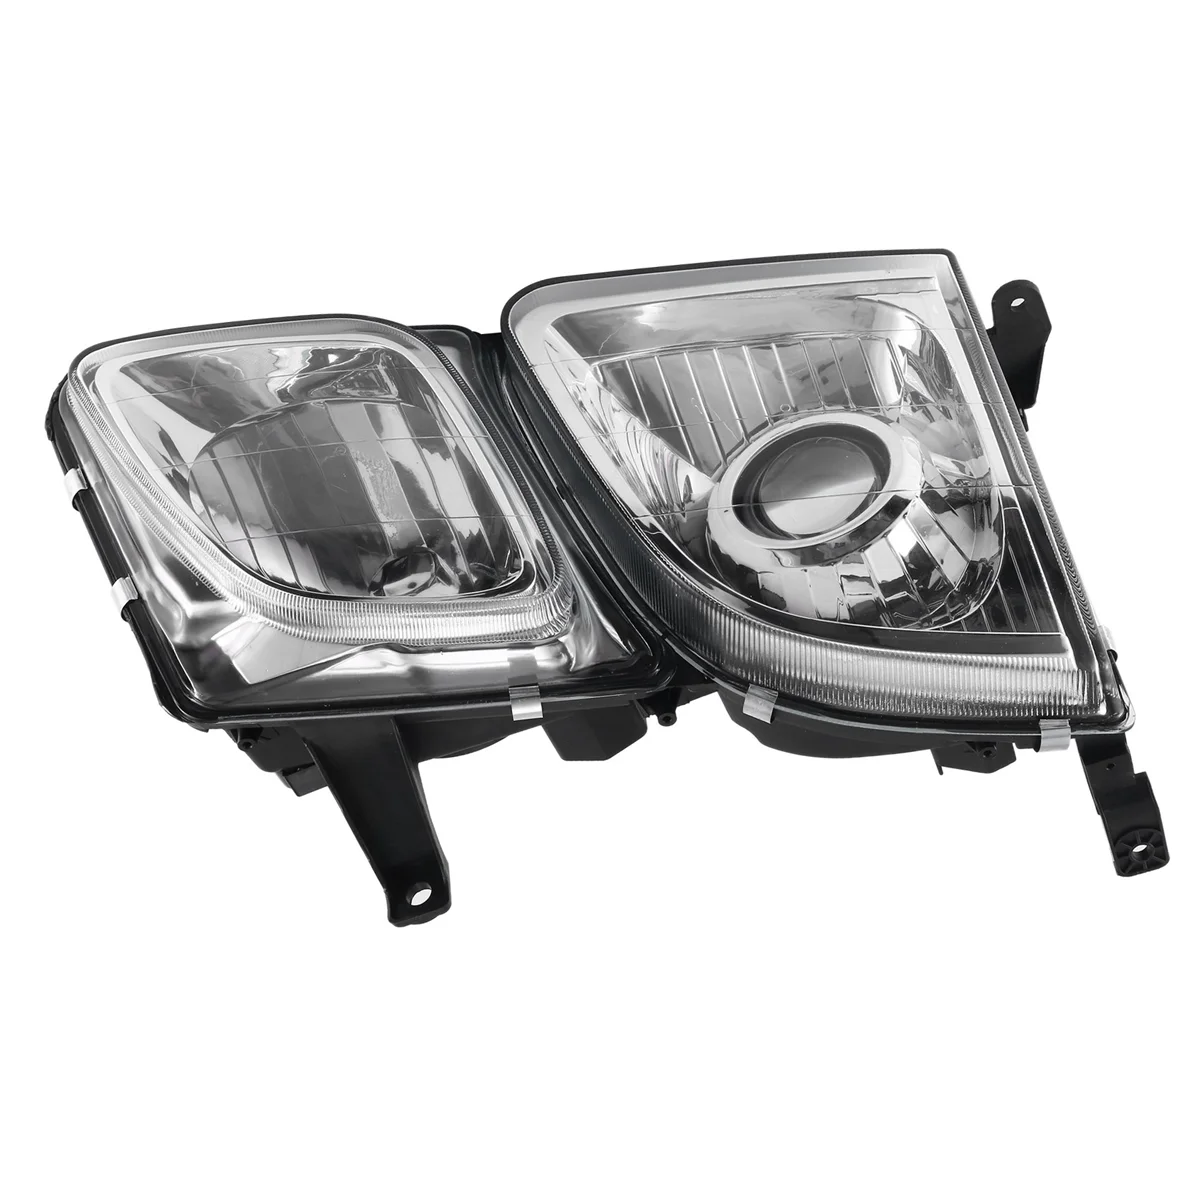 Right Car Front Bumper Head Light Lamp Driving Lamp for Lexus LX470 1998 1999 2000-2007 Head Light Front